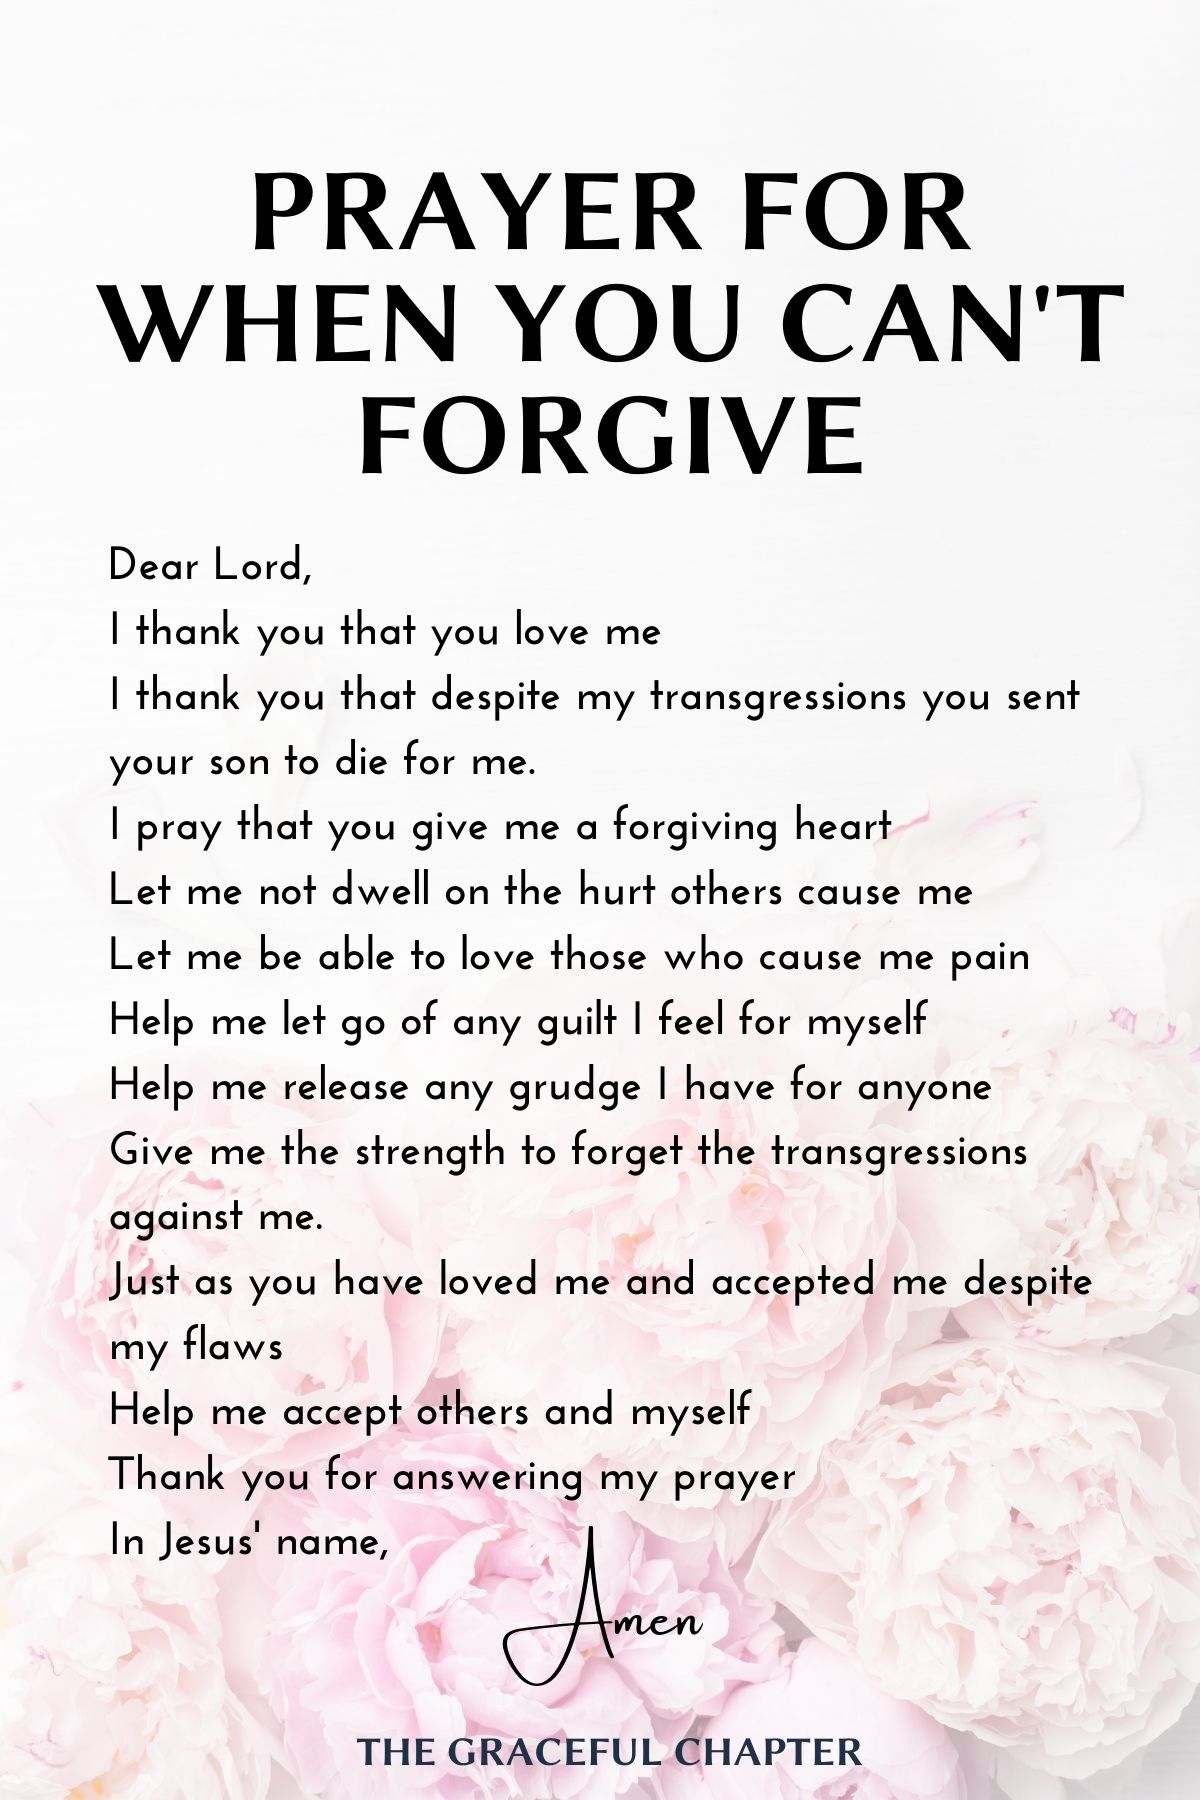 Prayer for when you can't forgive